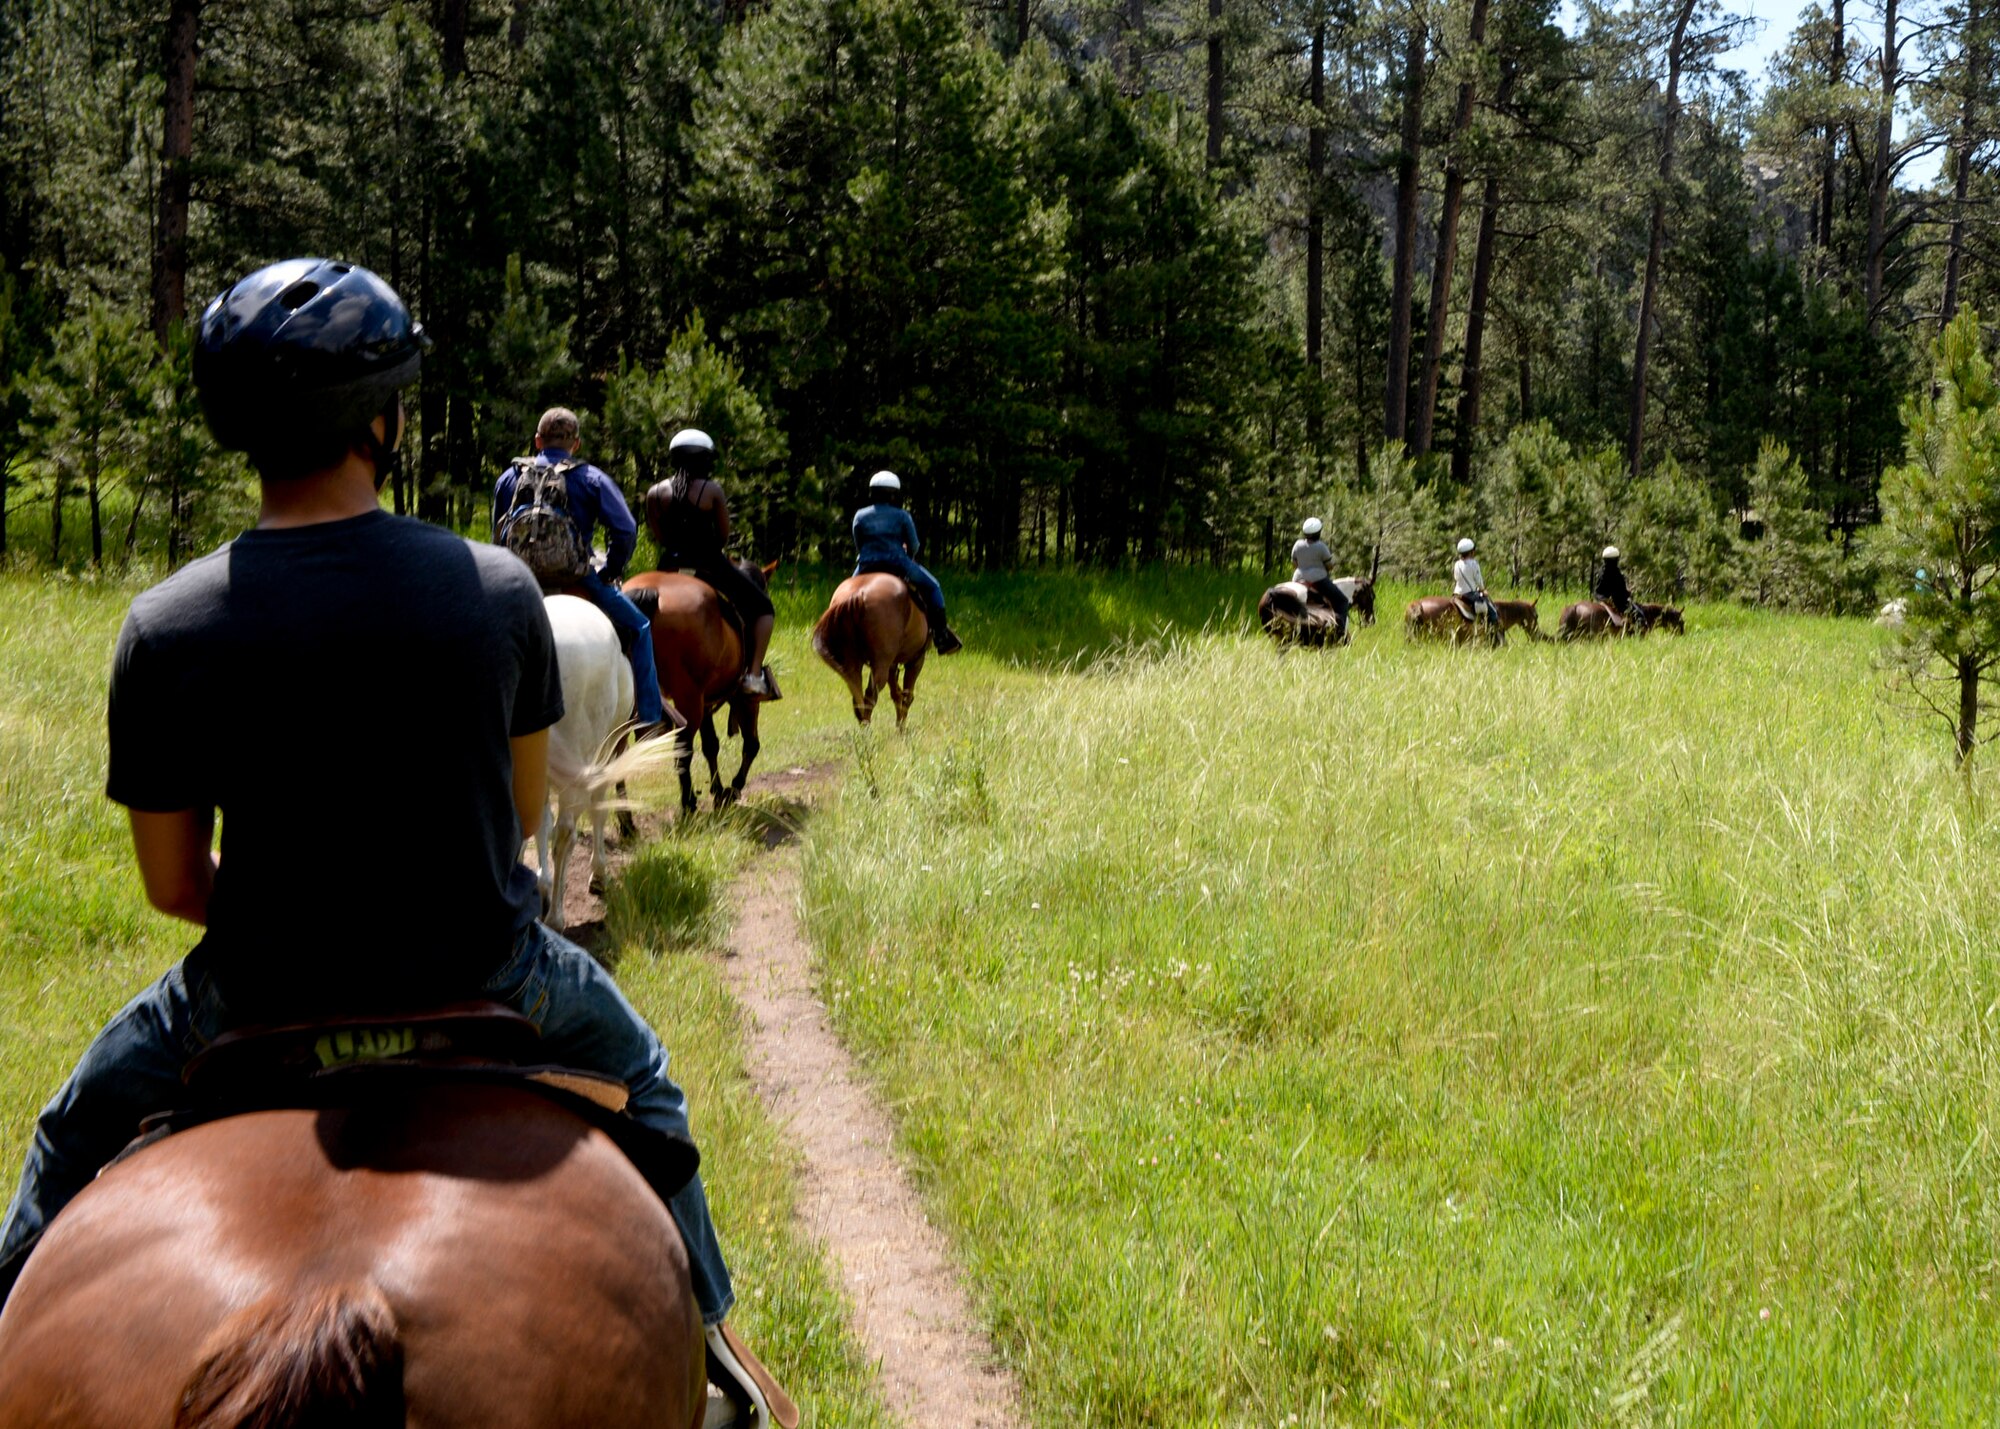 Ellsworth Airmen ride horses through Custer State Park, S.D., July 12, 2014, as part of an activity organized by the 28th Force Support Squadron outdoor recreation staff. The event, free for single Airmen, was designed to encourage participation in outdoor activities. (U.S. Air Force photo by Senior Airman Anania Tekurio/Released) 